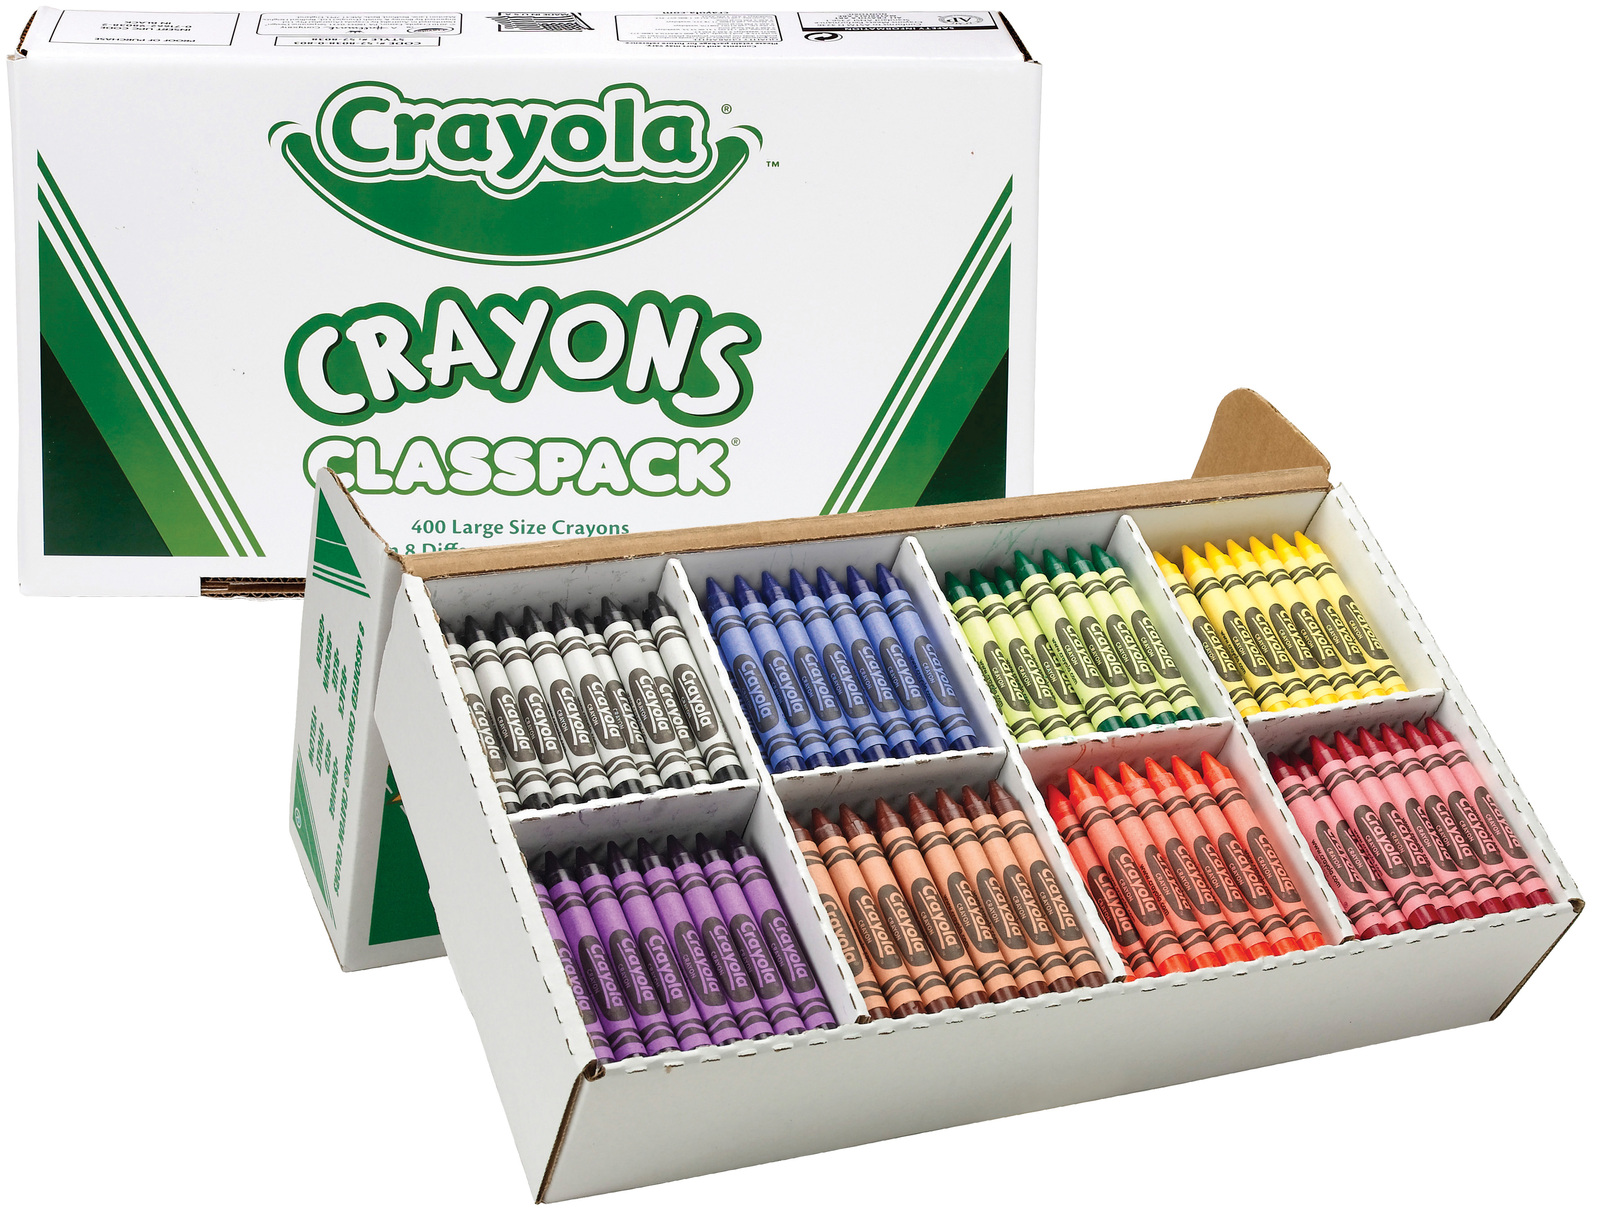 8 Count Crayola Jumbo Crayons: What's Inside the Box